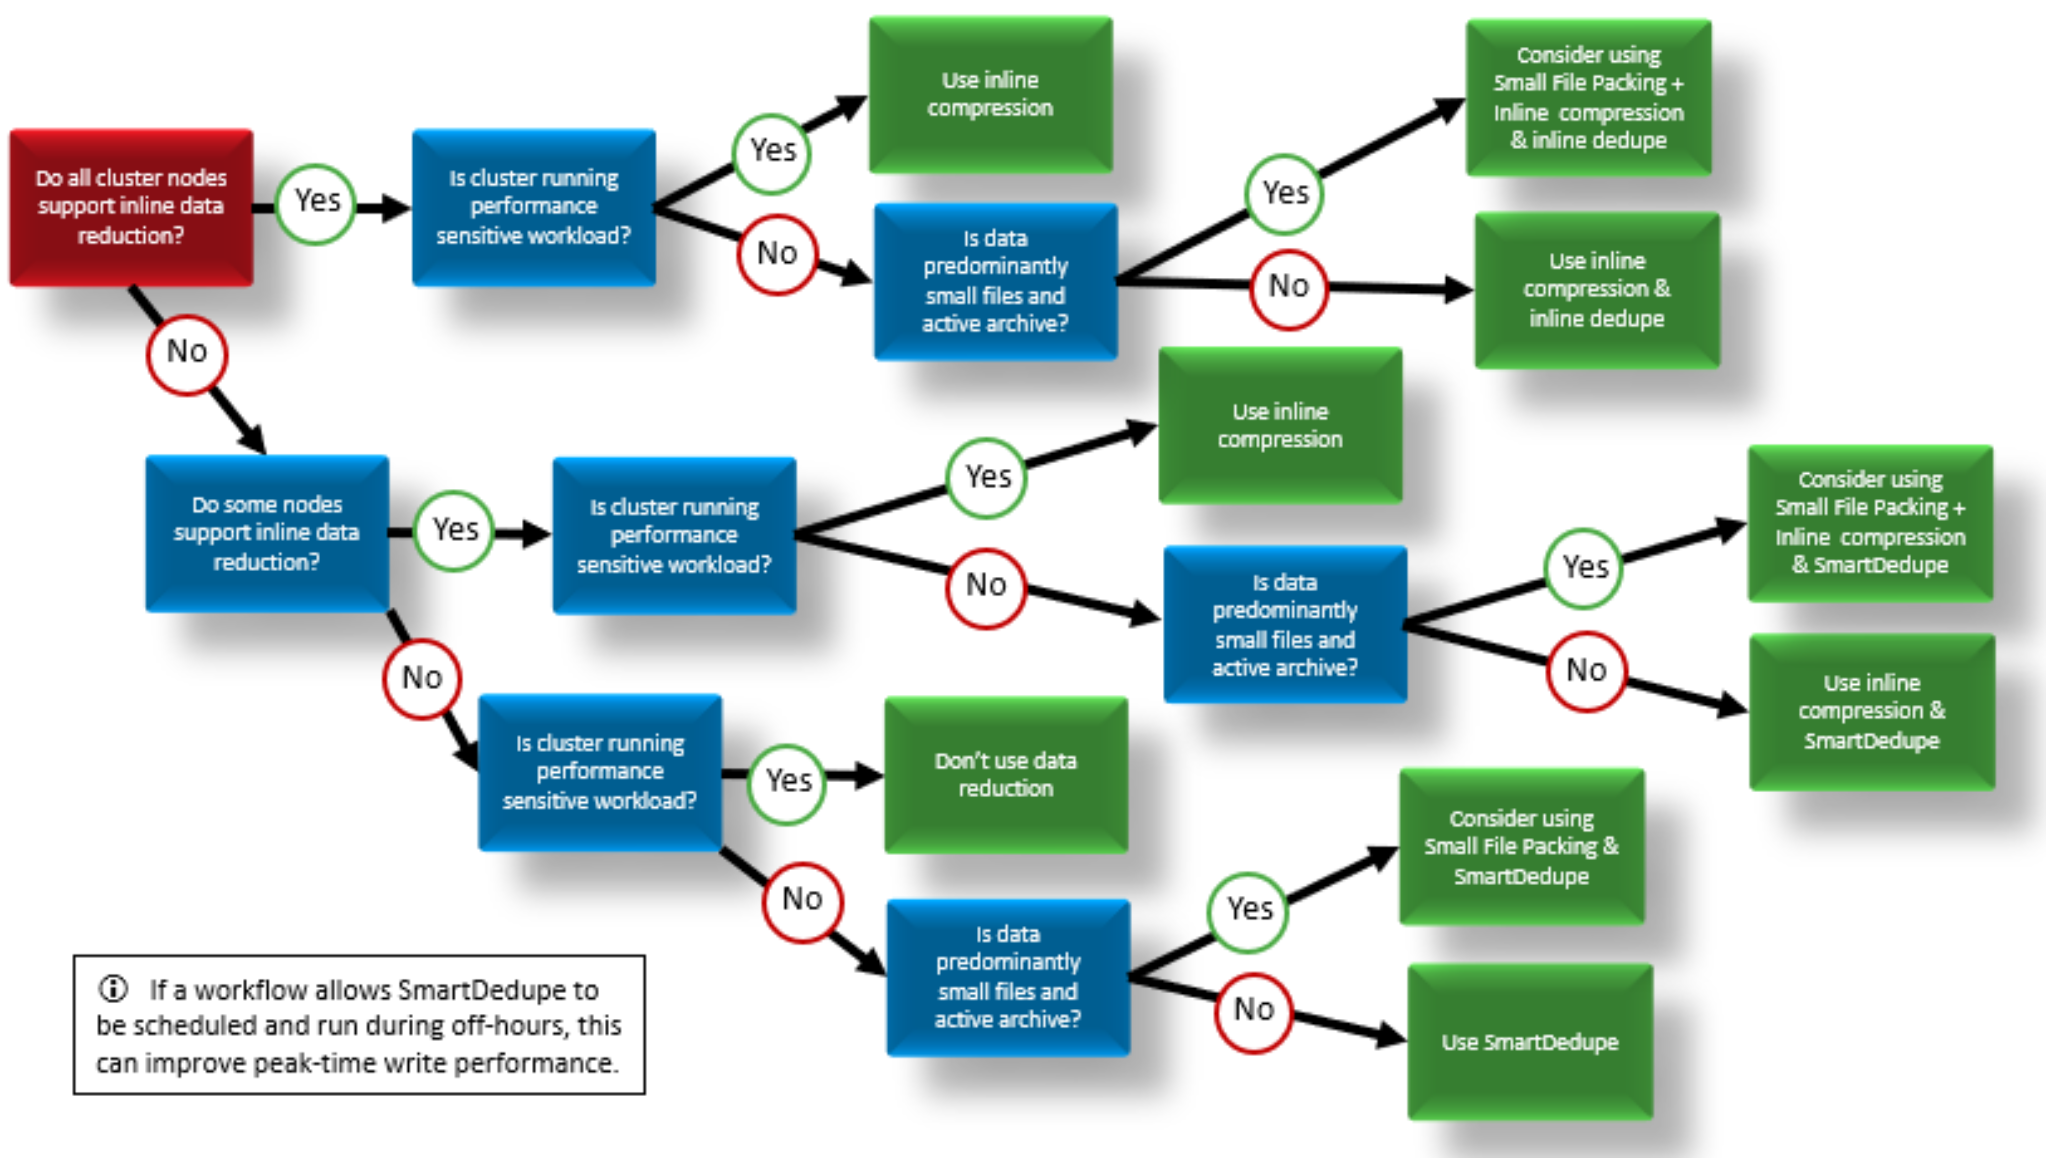 Decision tree for OneFS data reduction and storage efficiency configuring, including inline compression, inline dedupe, small file packing, and post-process dedupe.